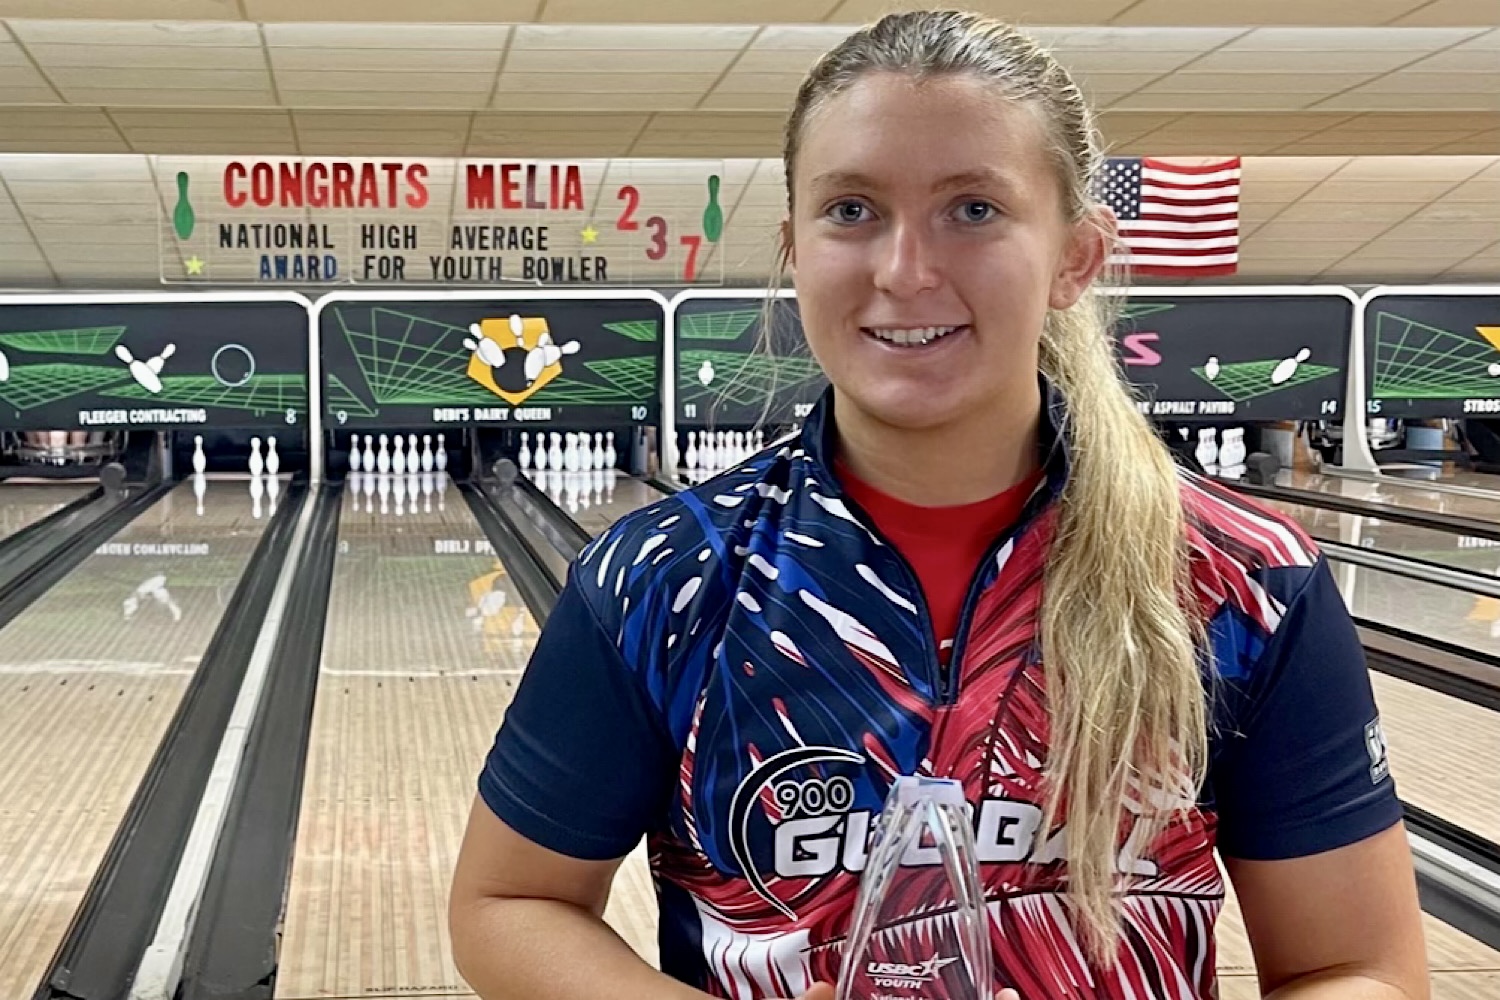 BEST OF THE BEST DuBois Central Catholics Melia Mitskavich Had Highest Youth Bowling Average in Nation Last Year, Chasing PBA Junior National Title Next Month